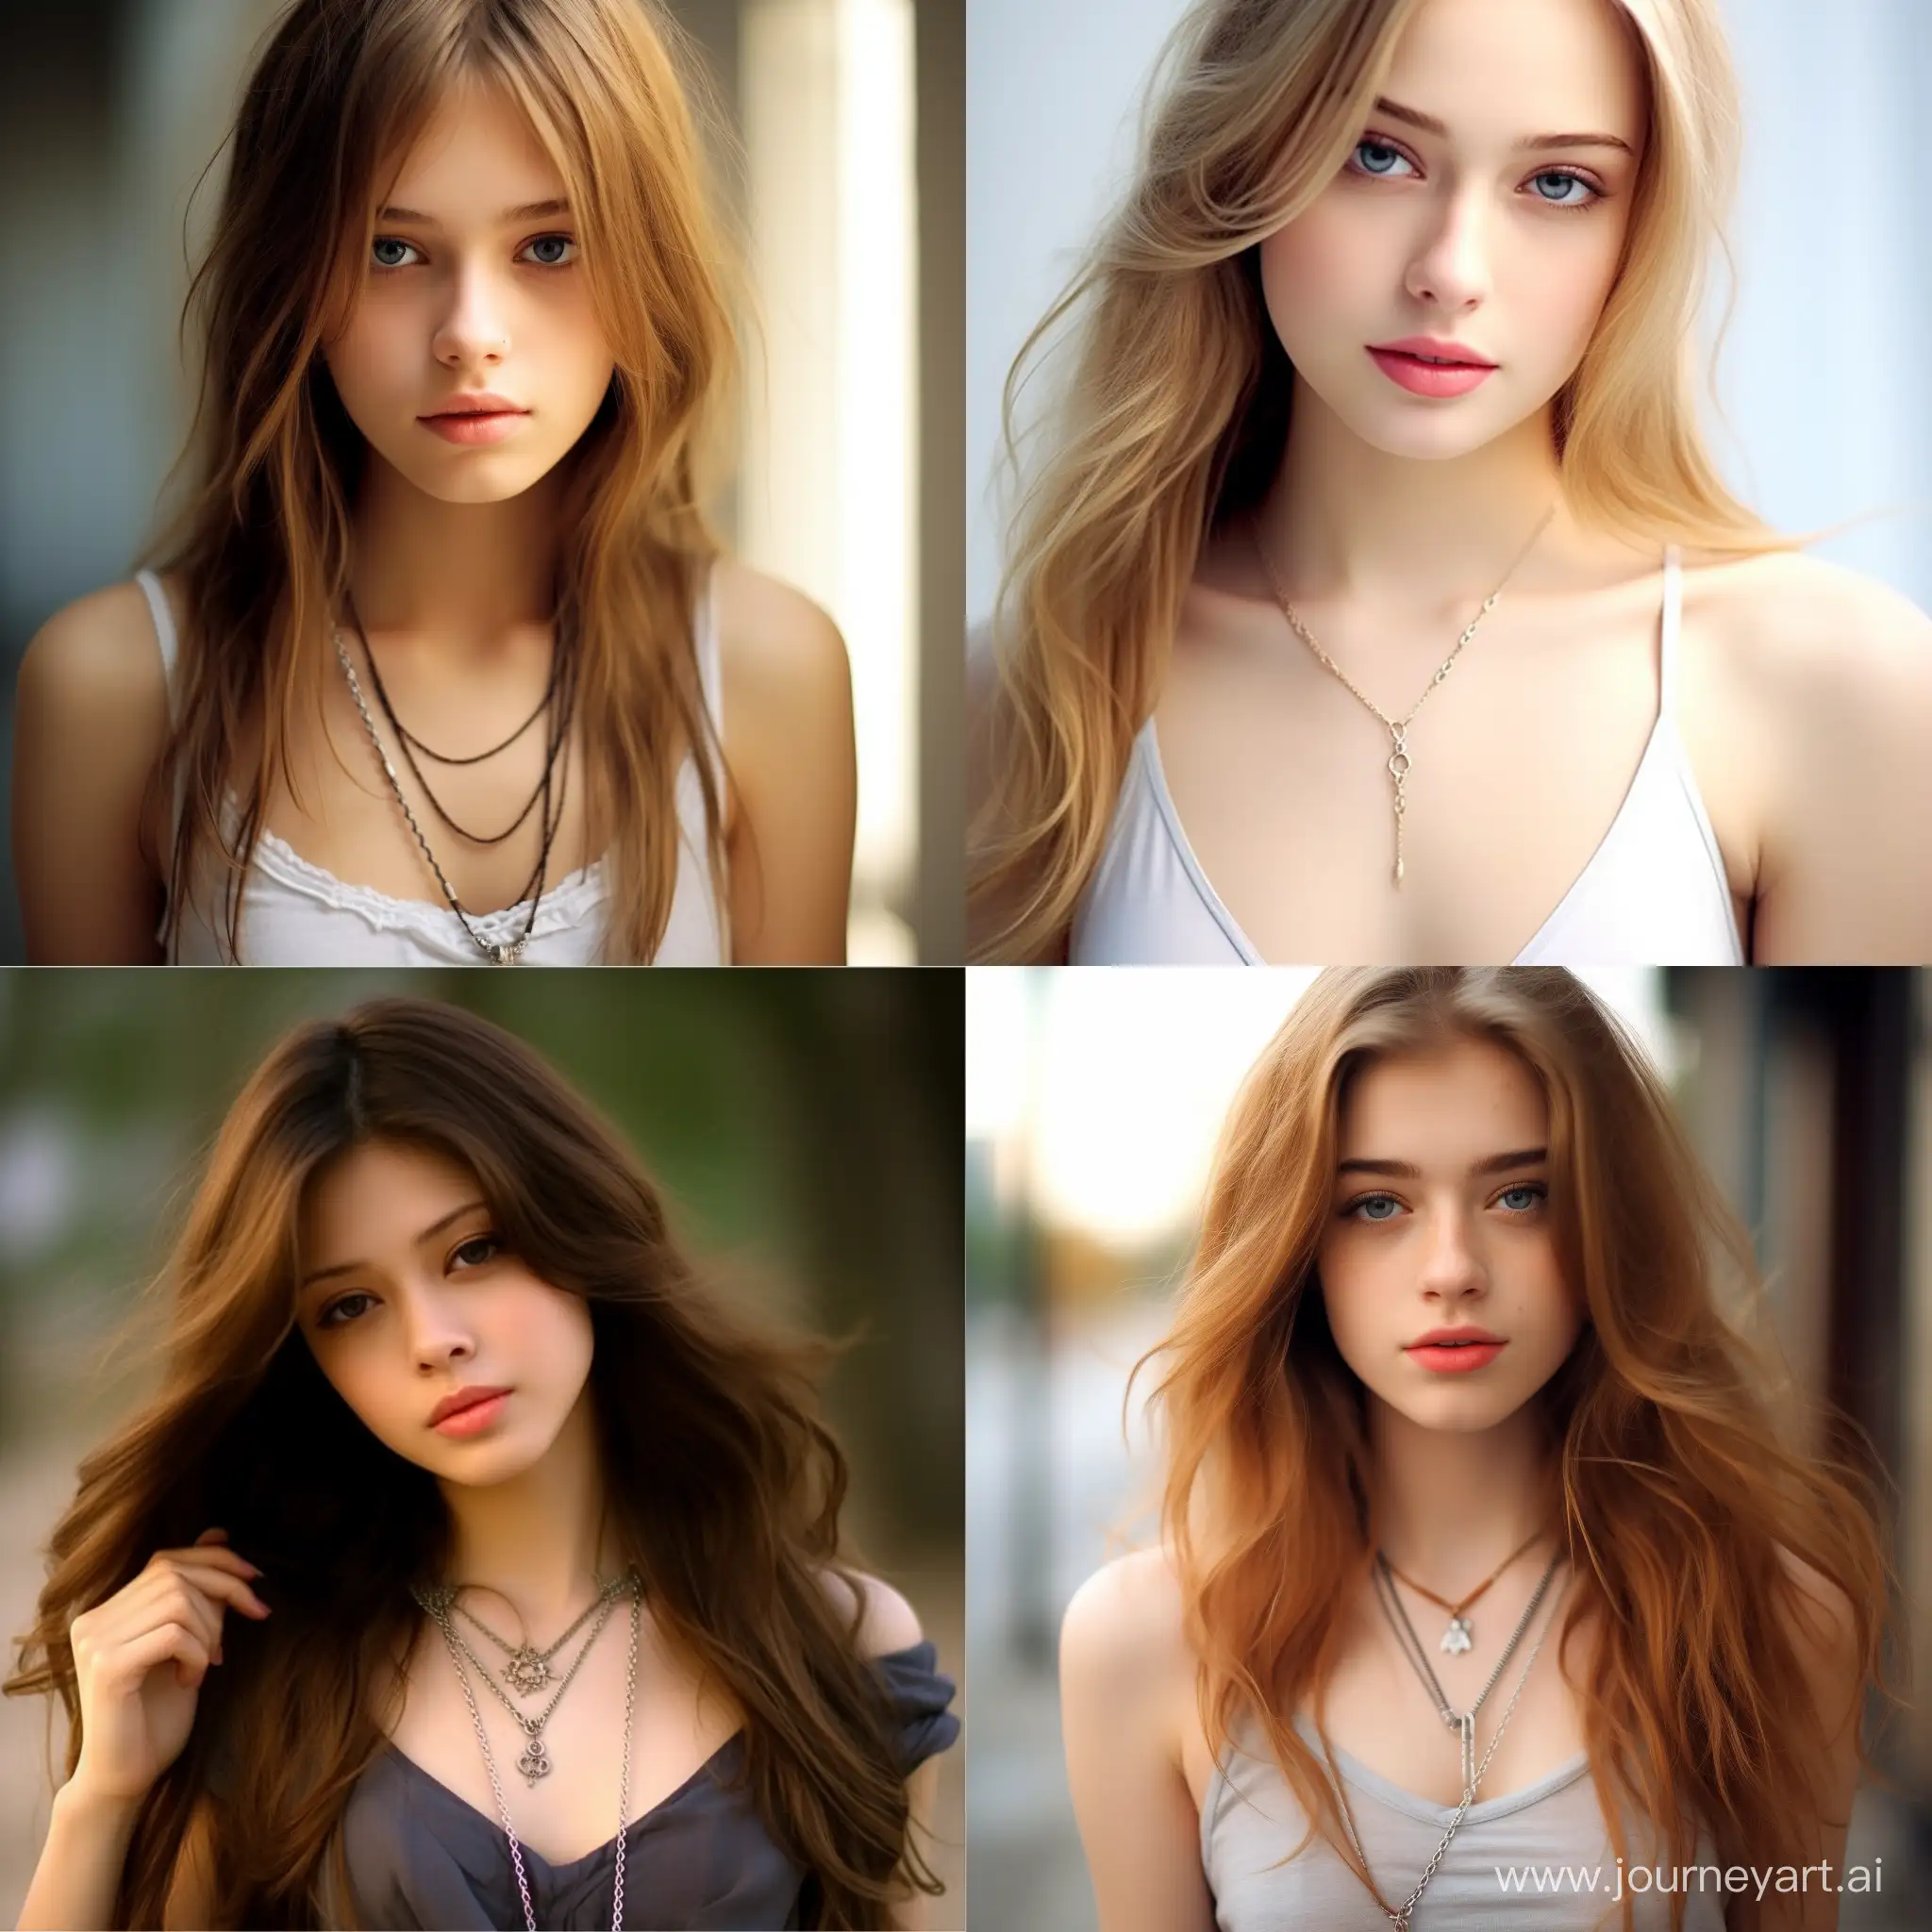 Fashionable-Girl-with-Elegant-OShaped-Link-Chain-Necklace-and-Pendant